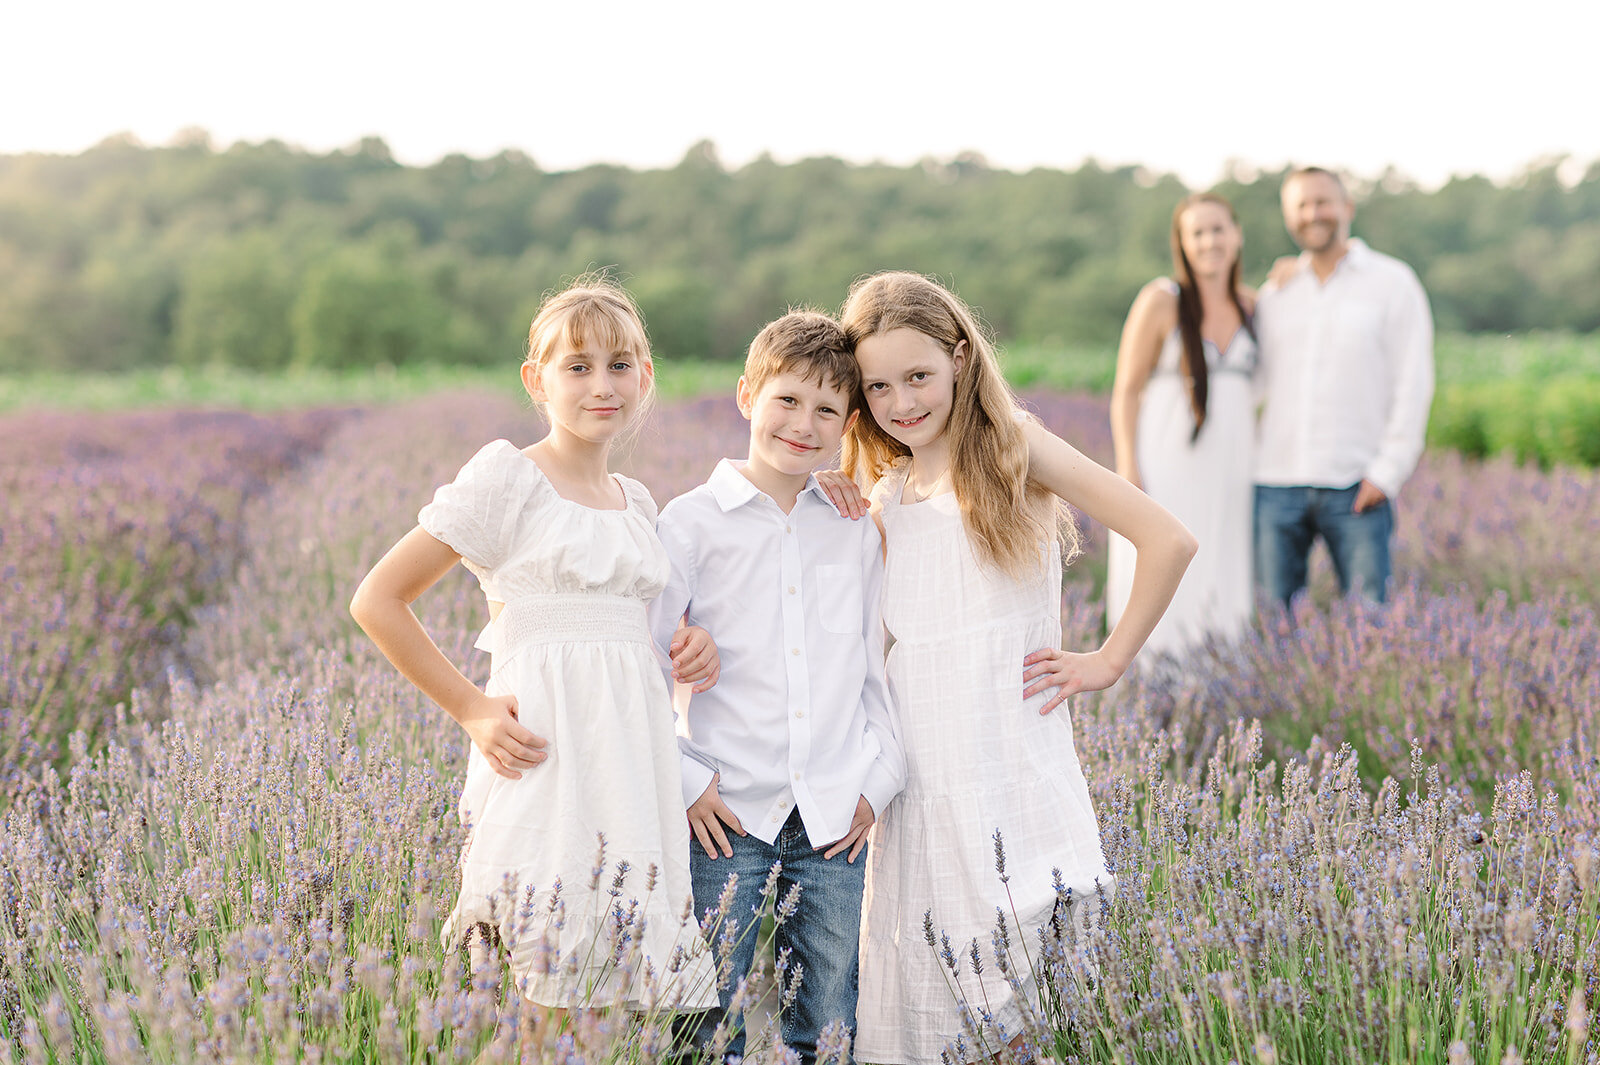 three children standing in lavender field with parents standing behind them baltimore md